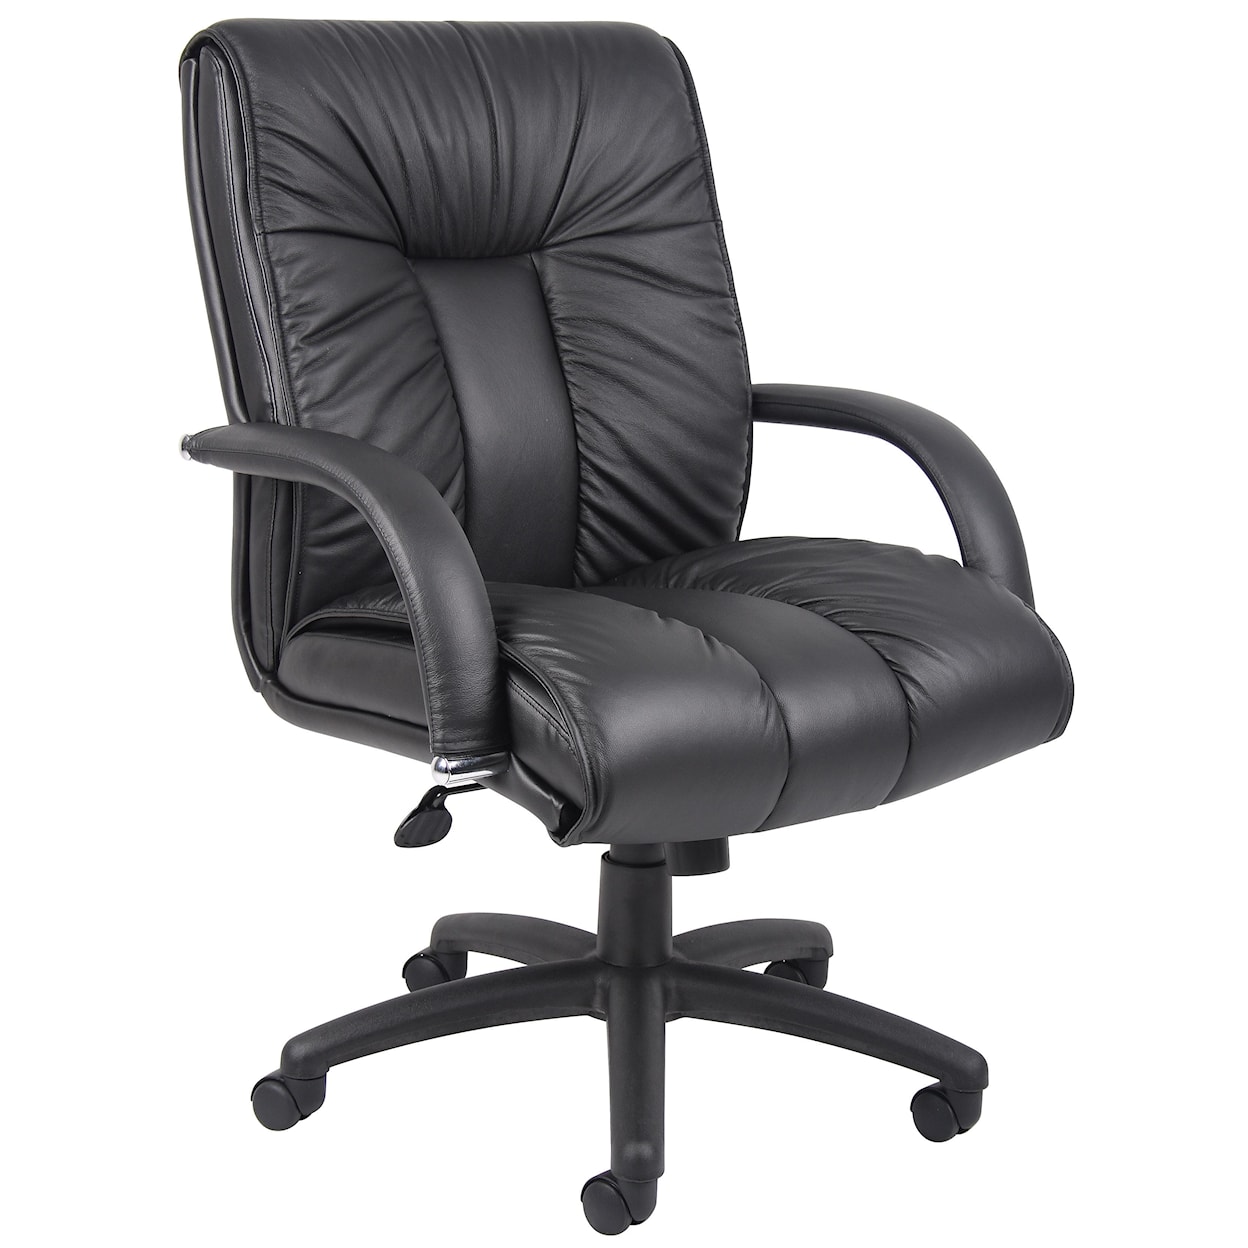 Presidential Seating Executive Chairs Italian Executive Leather Chair